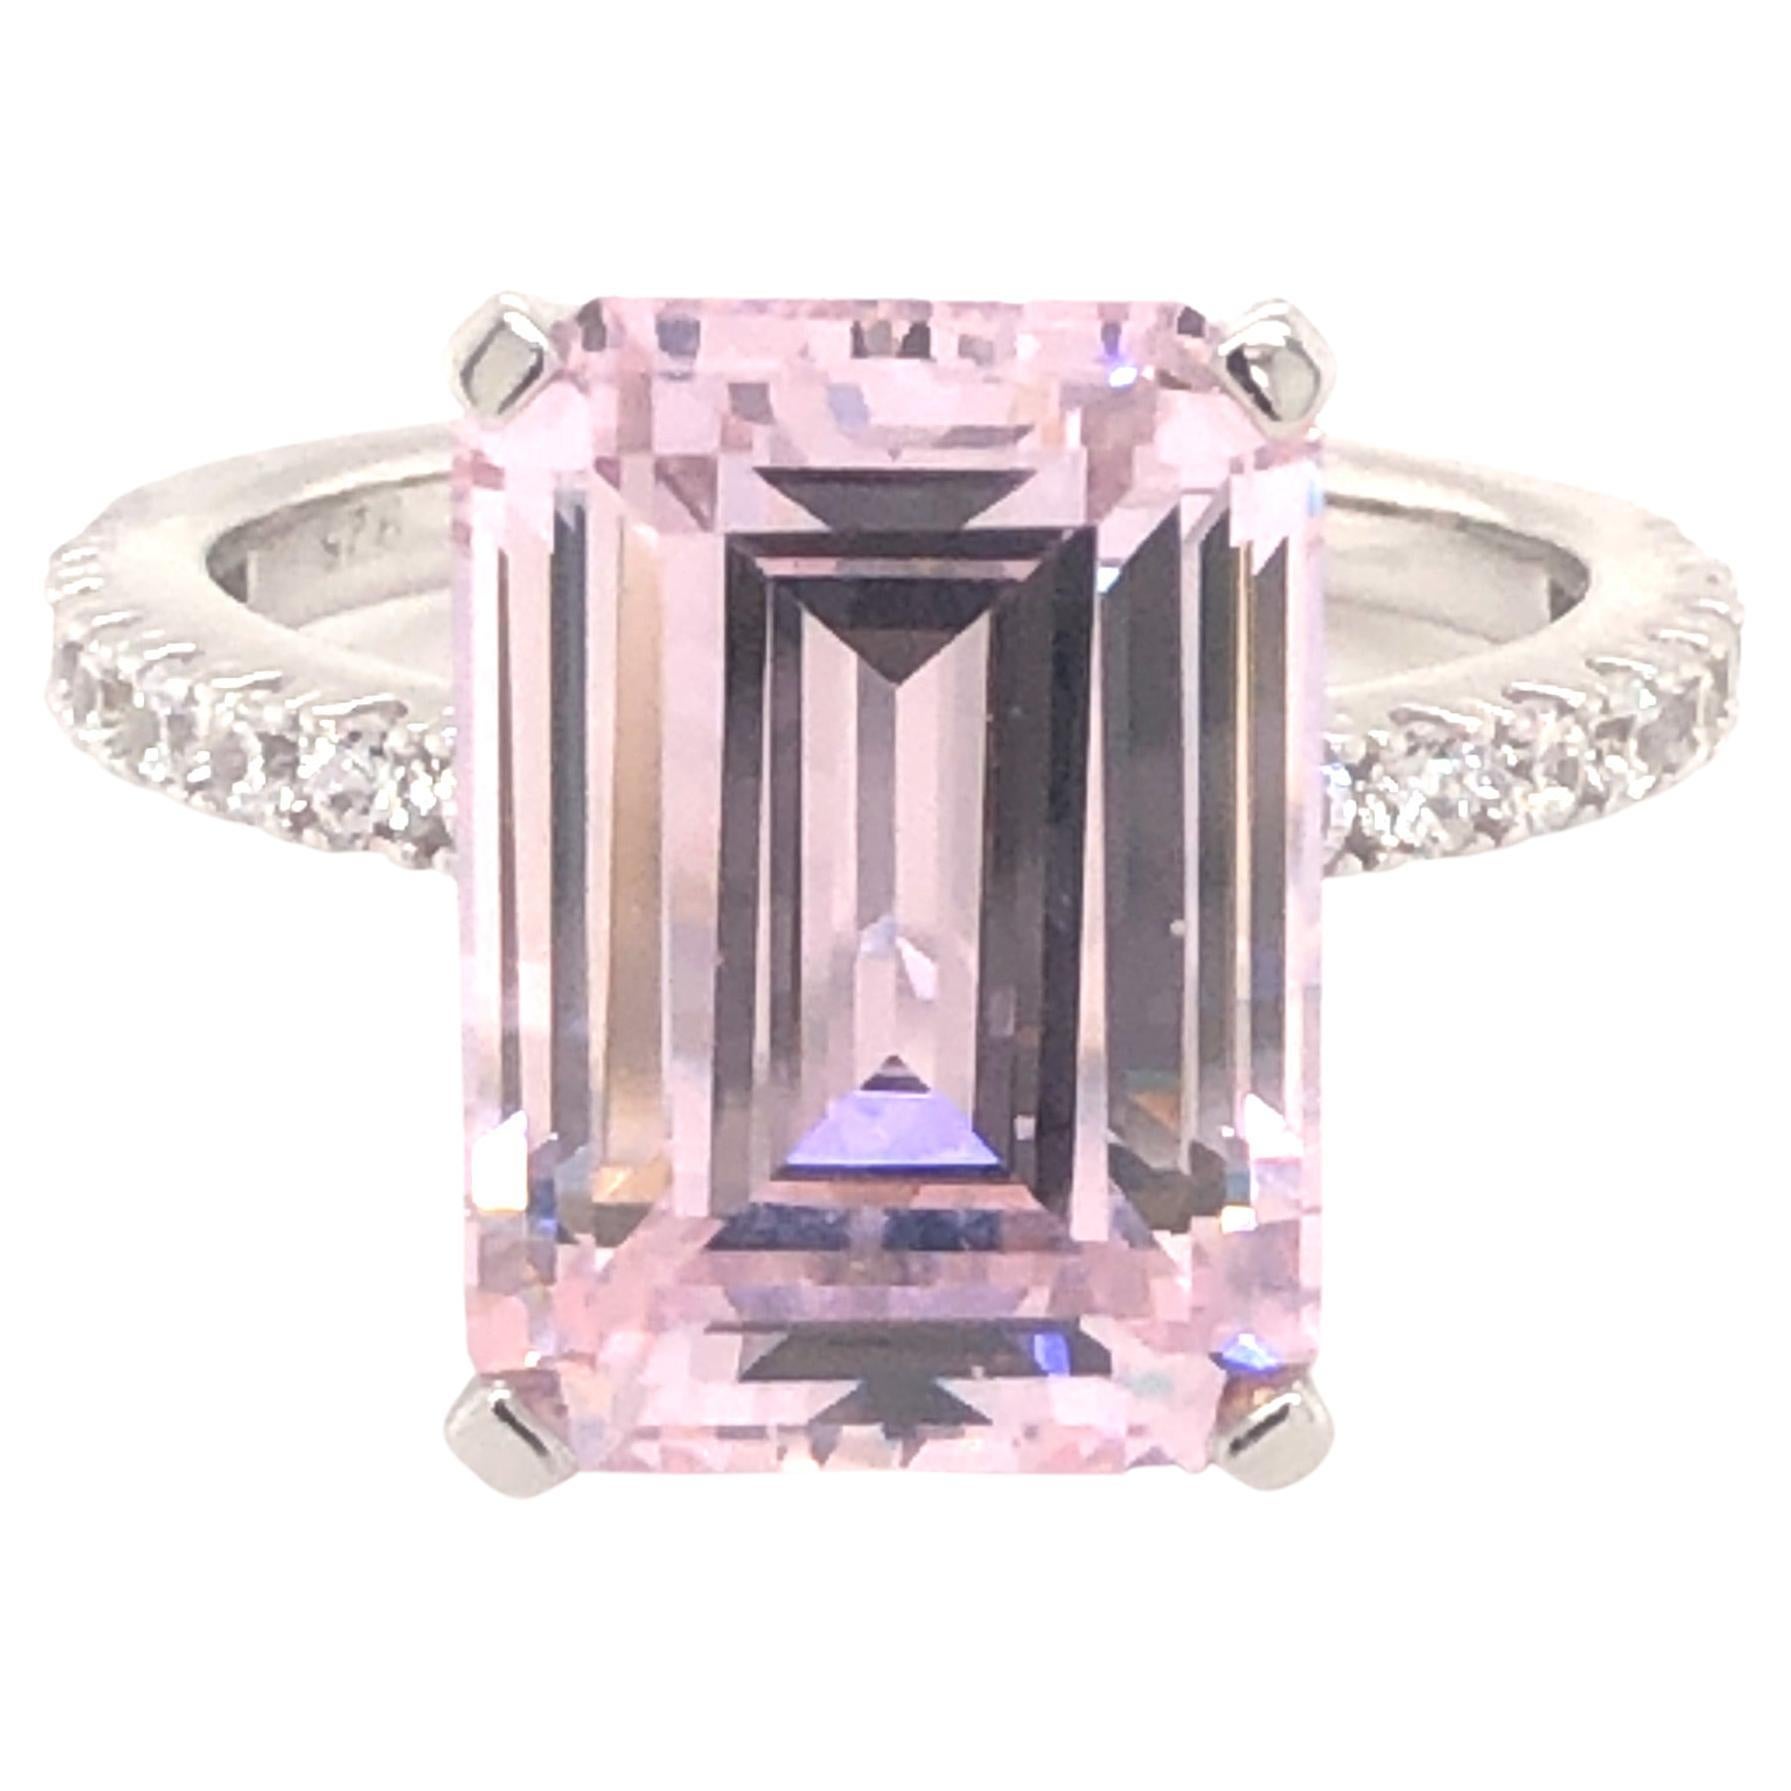 8.00Carat Emerald Cut Pink Spinel Cubic Zirconia Sterling Silver Engagement Ring